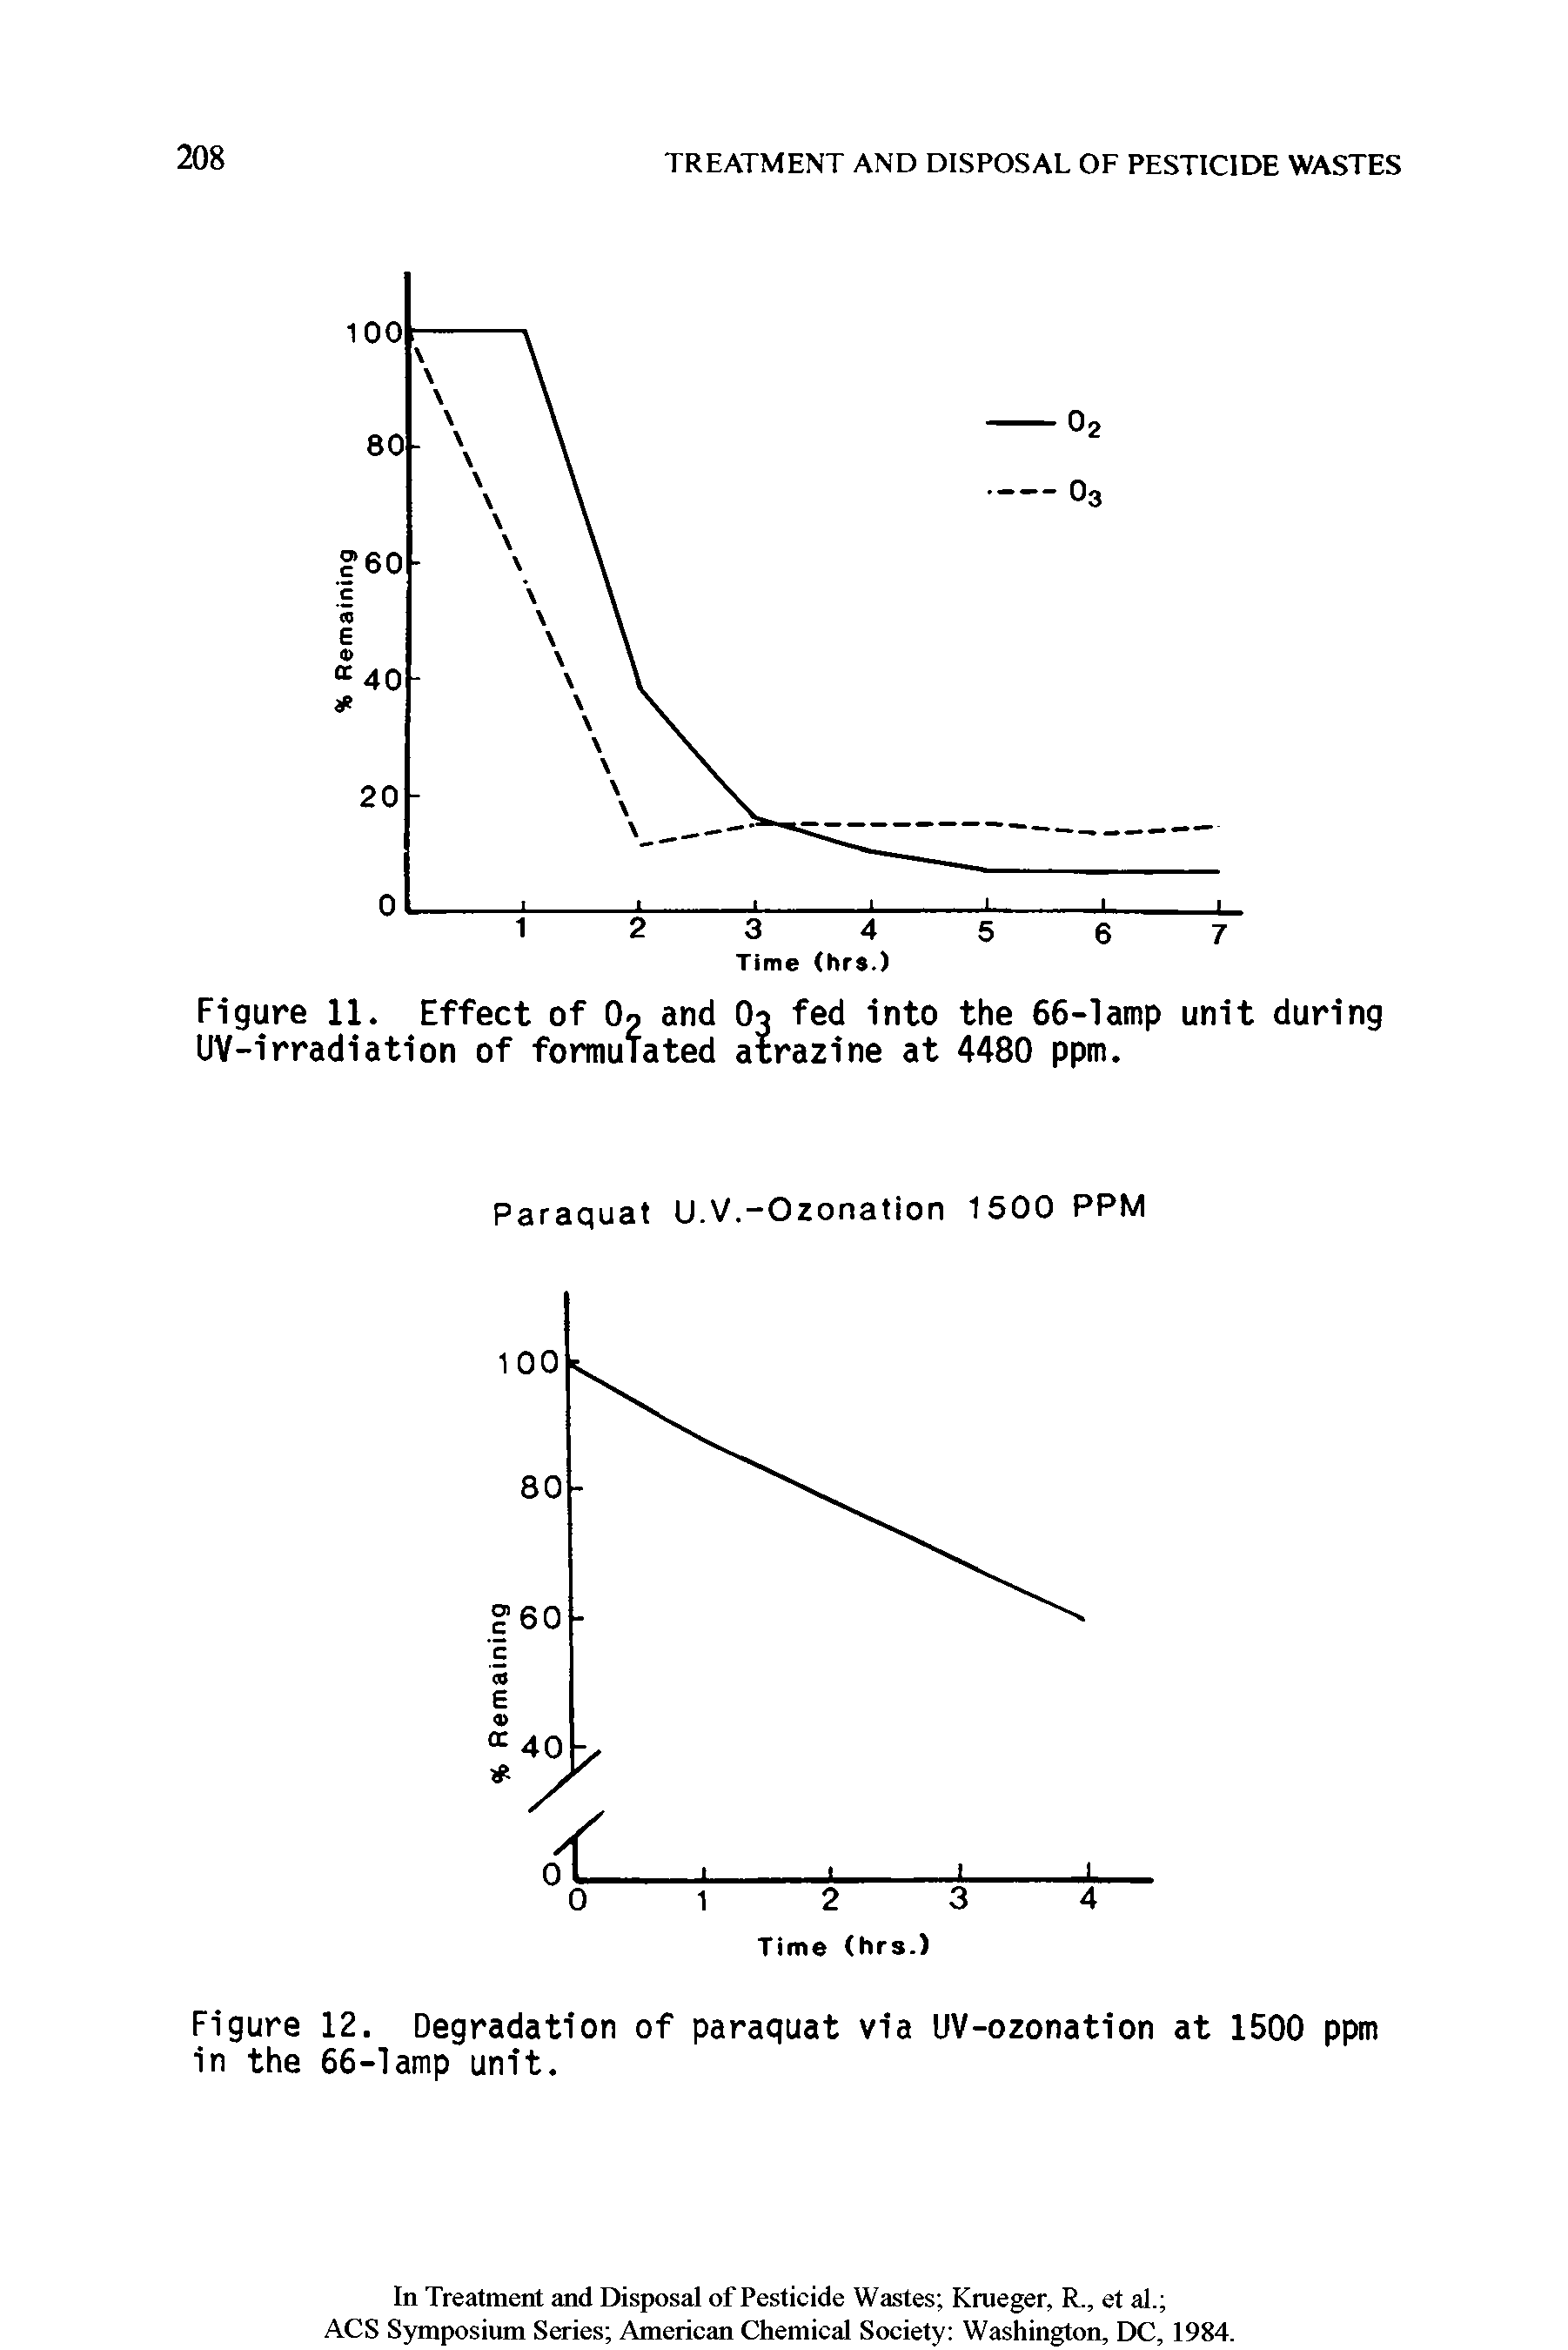 Figure 12. Degradation of paraquat via UV-ozonation at 1500 ppm in the 66-lamp unit.